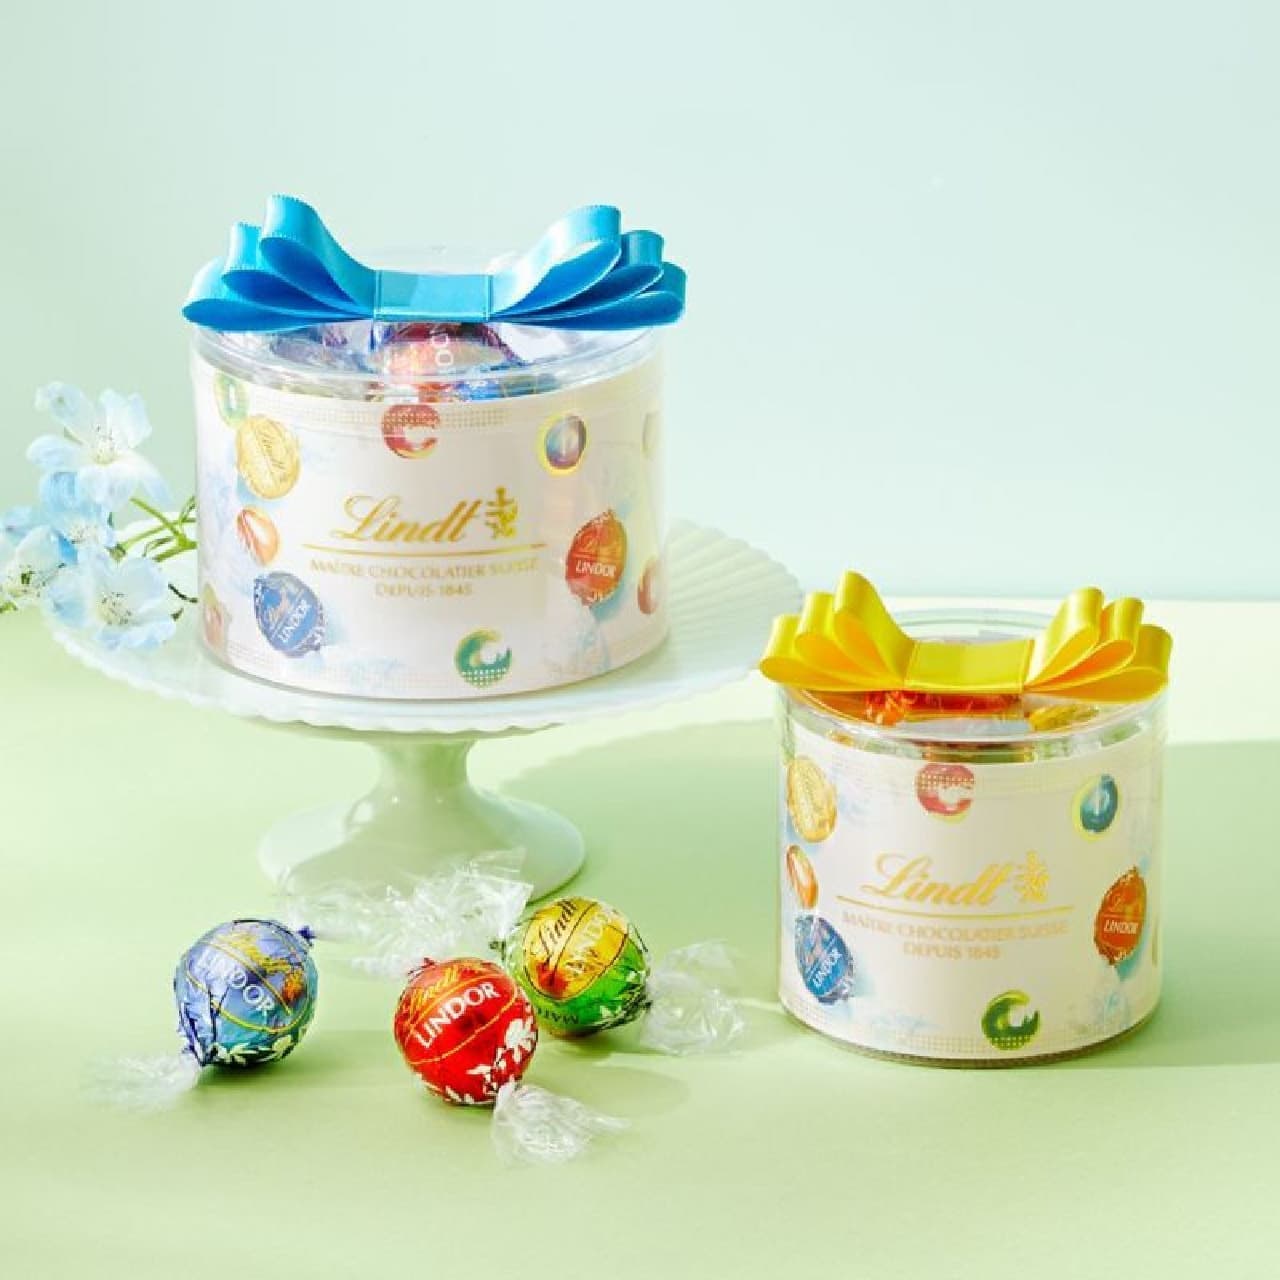 Lindt] The perfect gift for early summer! Refreshing Chocolate Gift Special